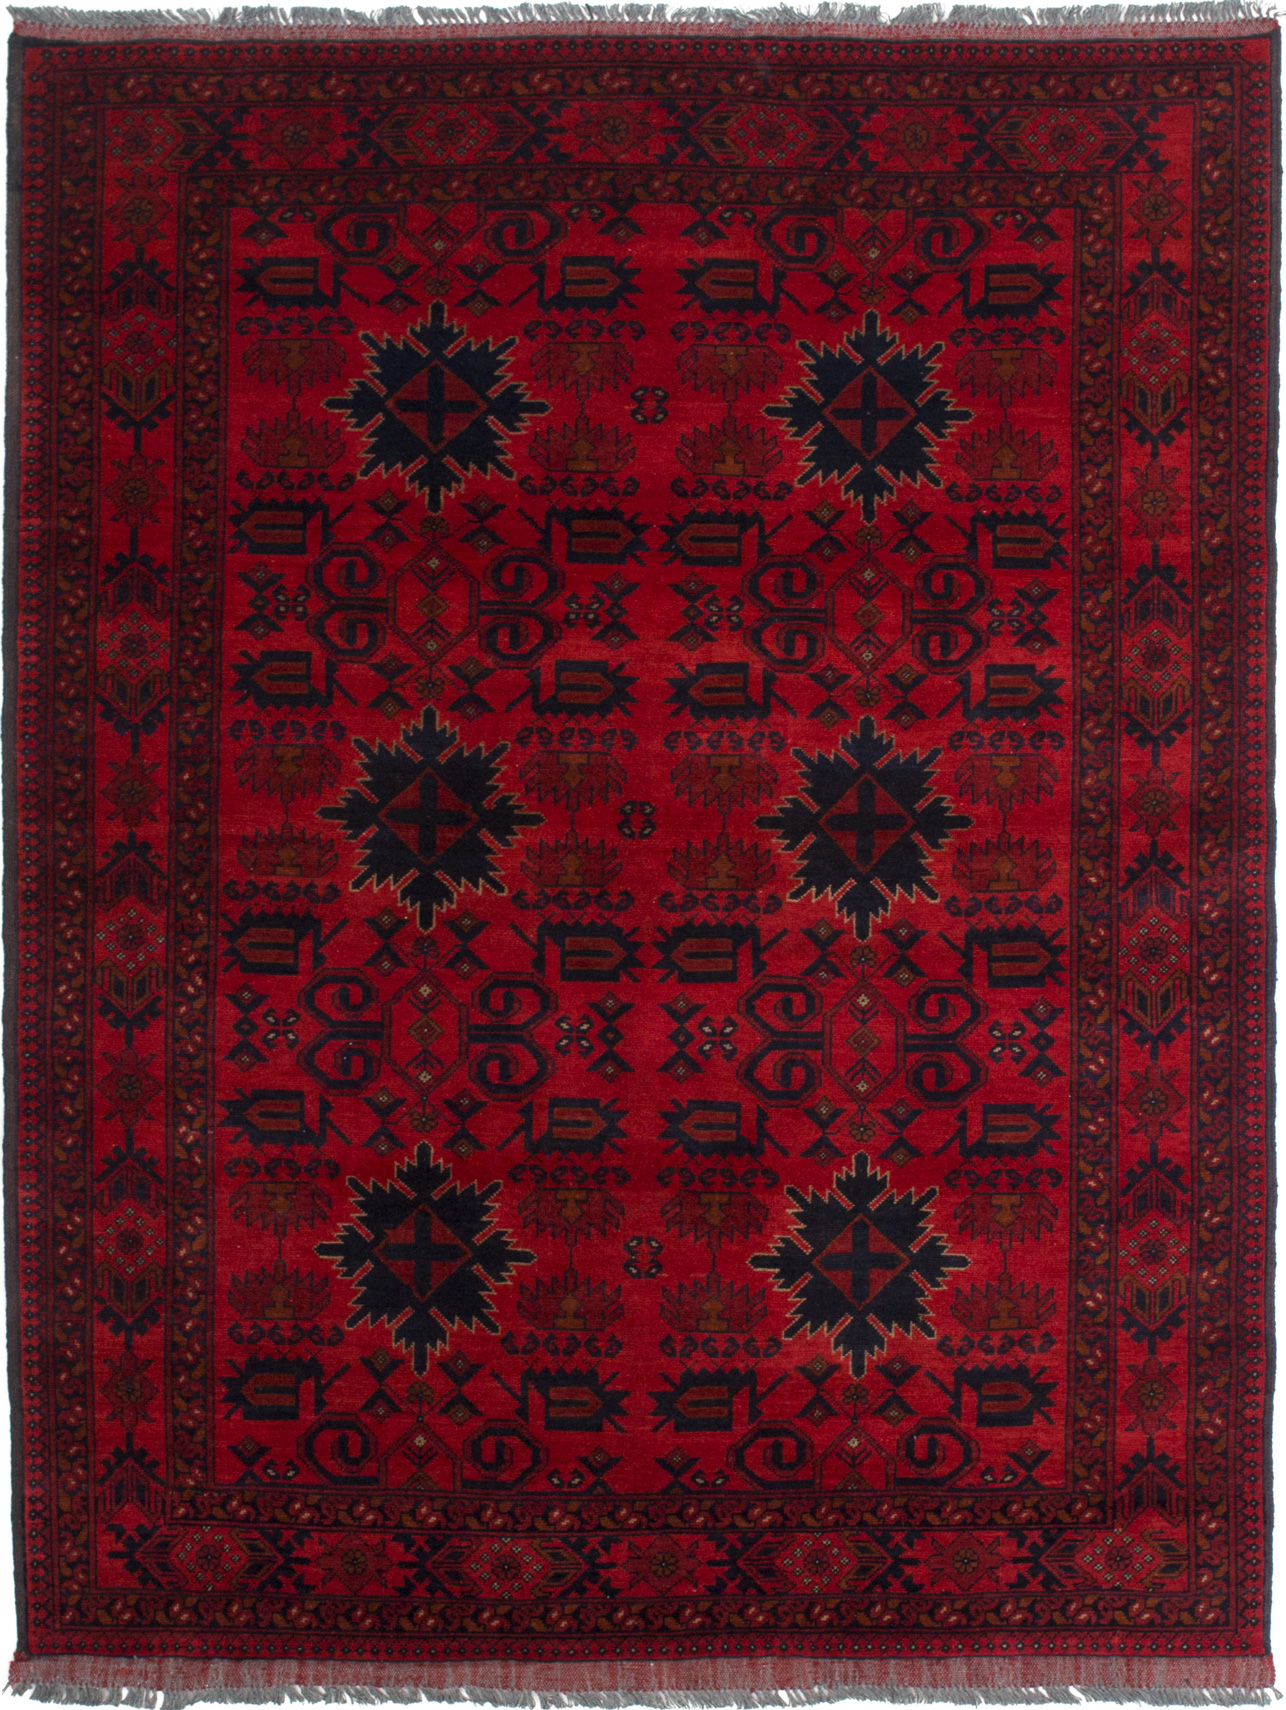 Hand-knotted Finest Khal Mohammadi Red Wool Rug 4'11" x 6'6" (18) Size: 4'11" x 6'6"  